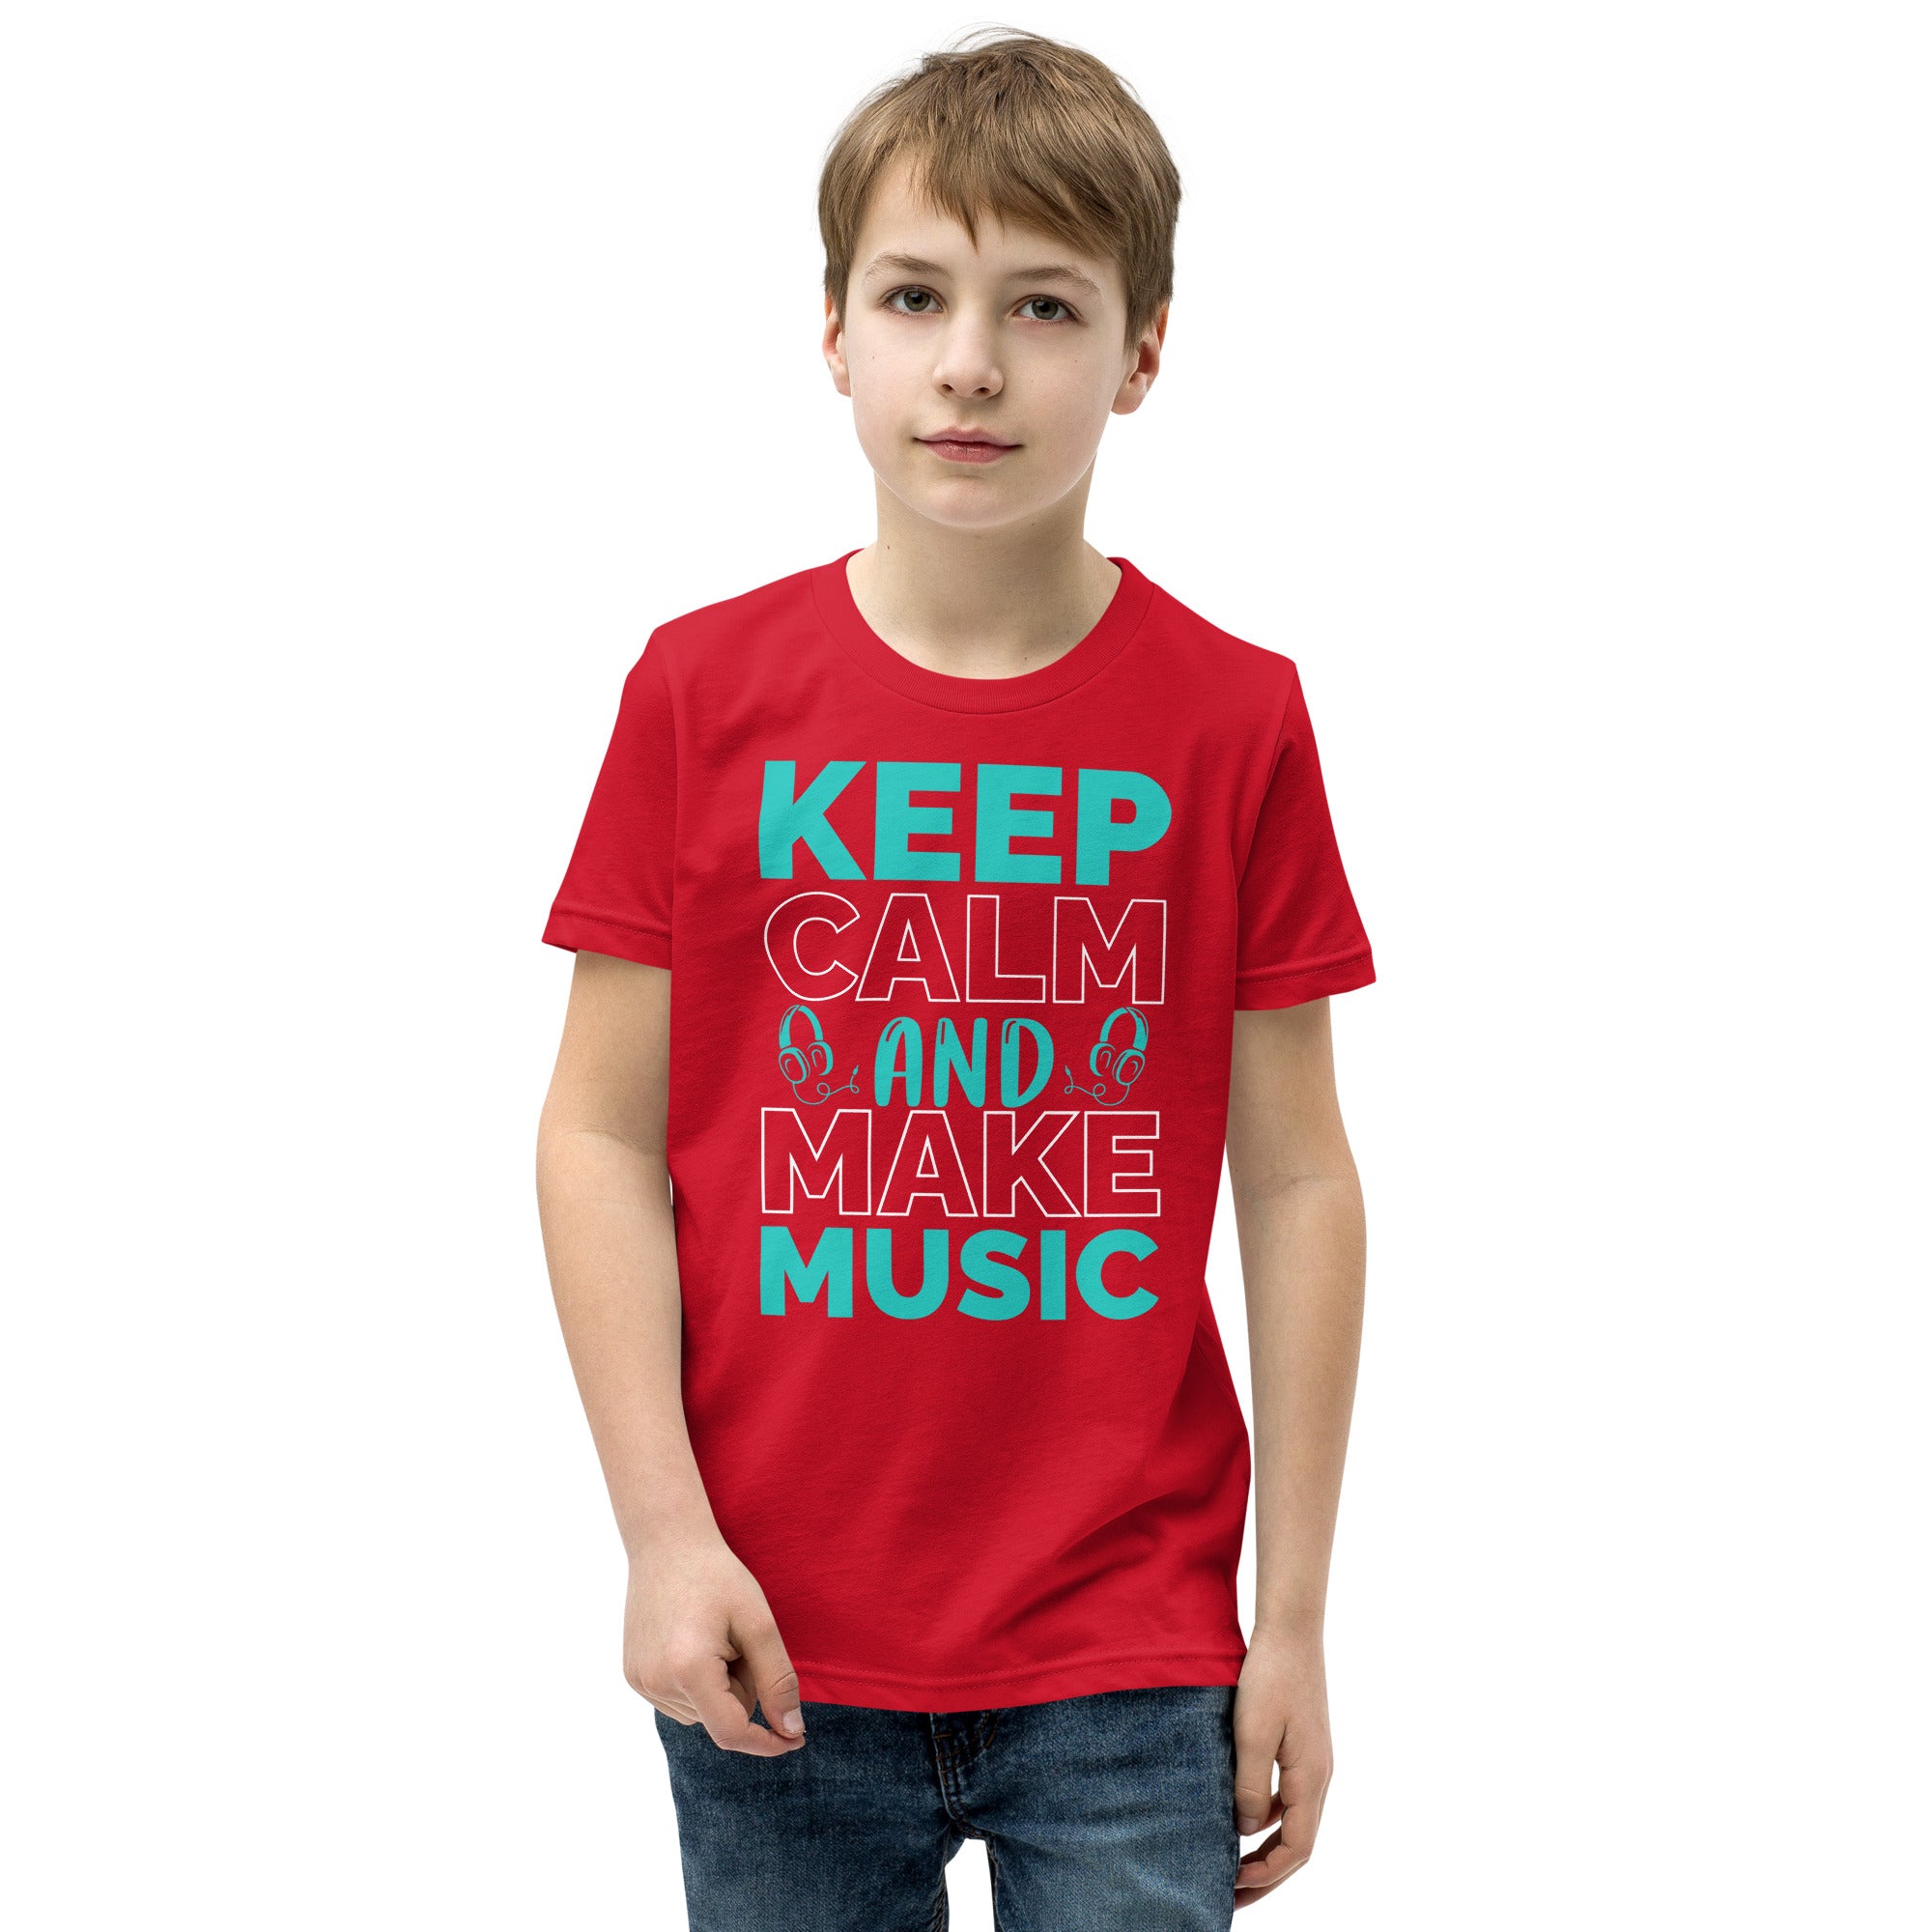 Youth Short Sleeve T-Shirt, Back to School, Everyday T Shirt